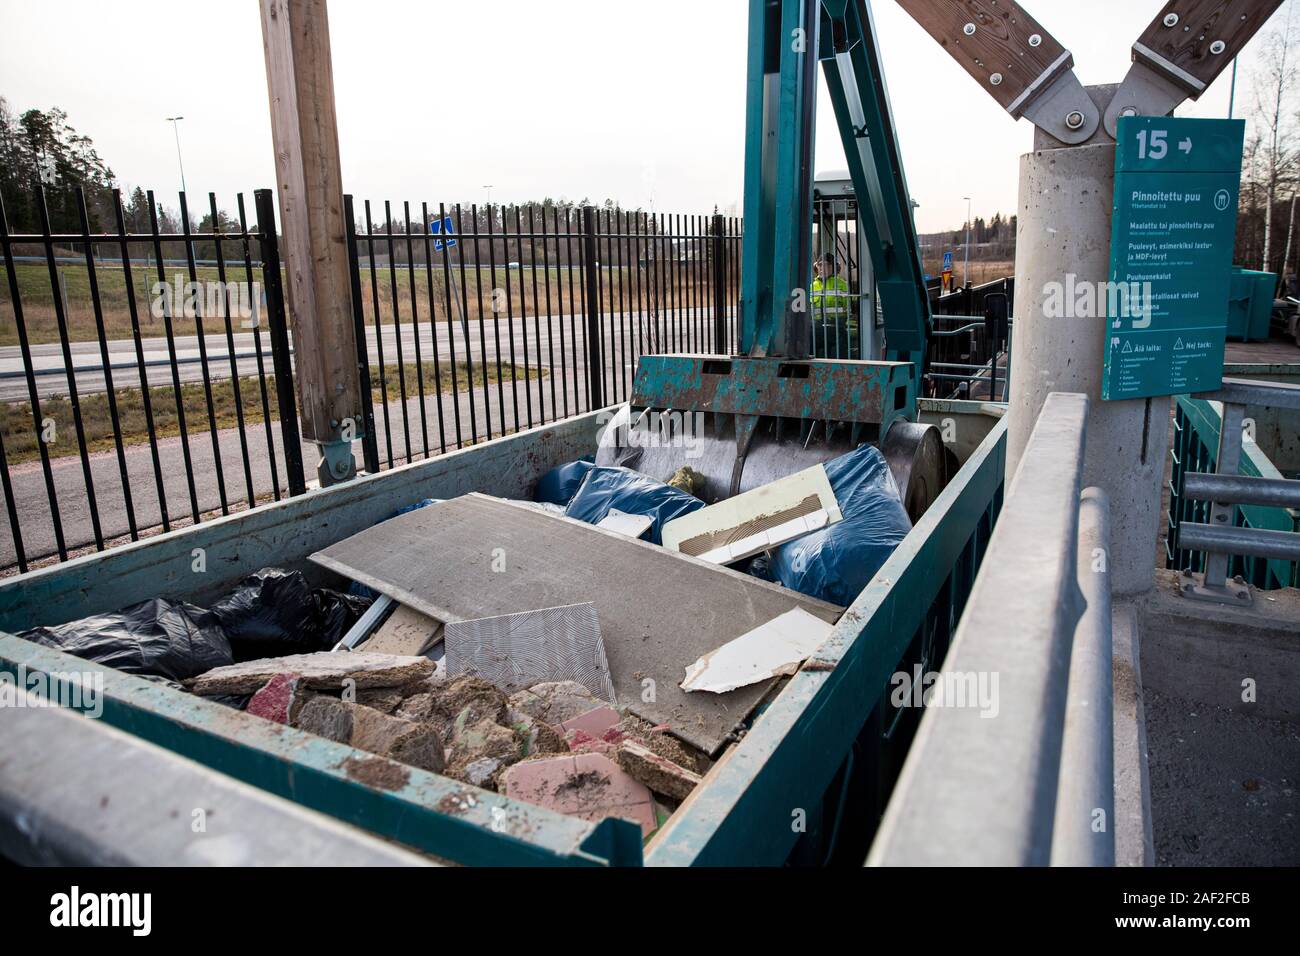 Sorting station HSY - center for sorting, safe disposal and recycling of waste. Special equipment is pressing construction waste in a container Stock Photo